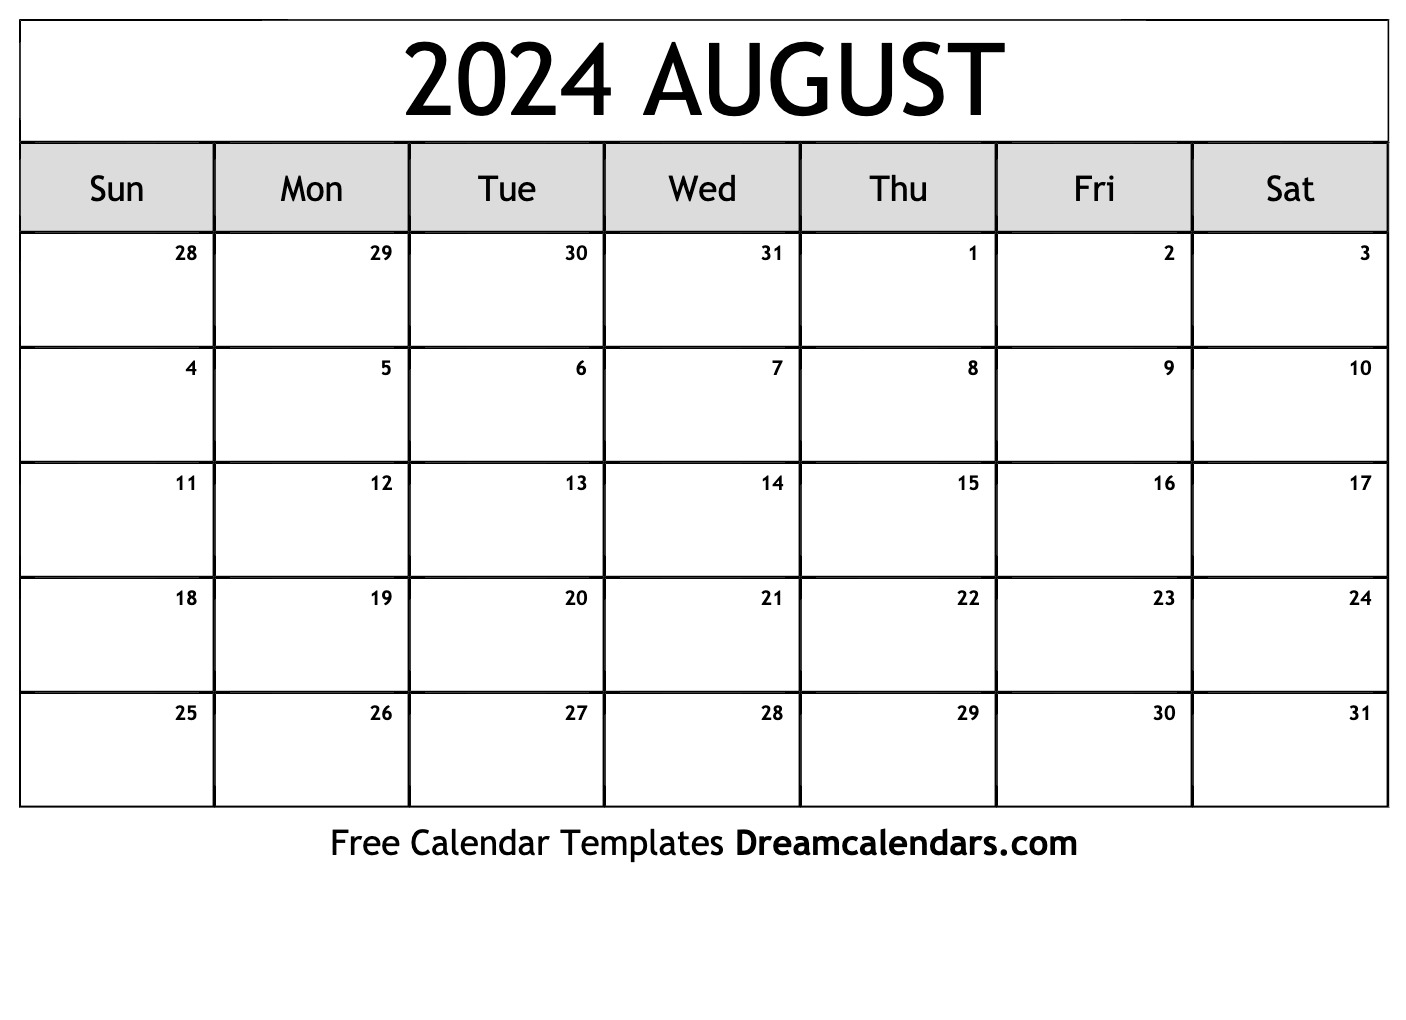 grab-calendar-august-2024-cool-amazing-review-of-january-2024